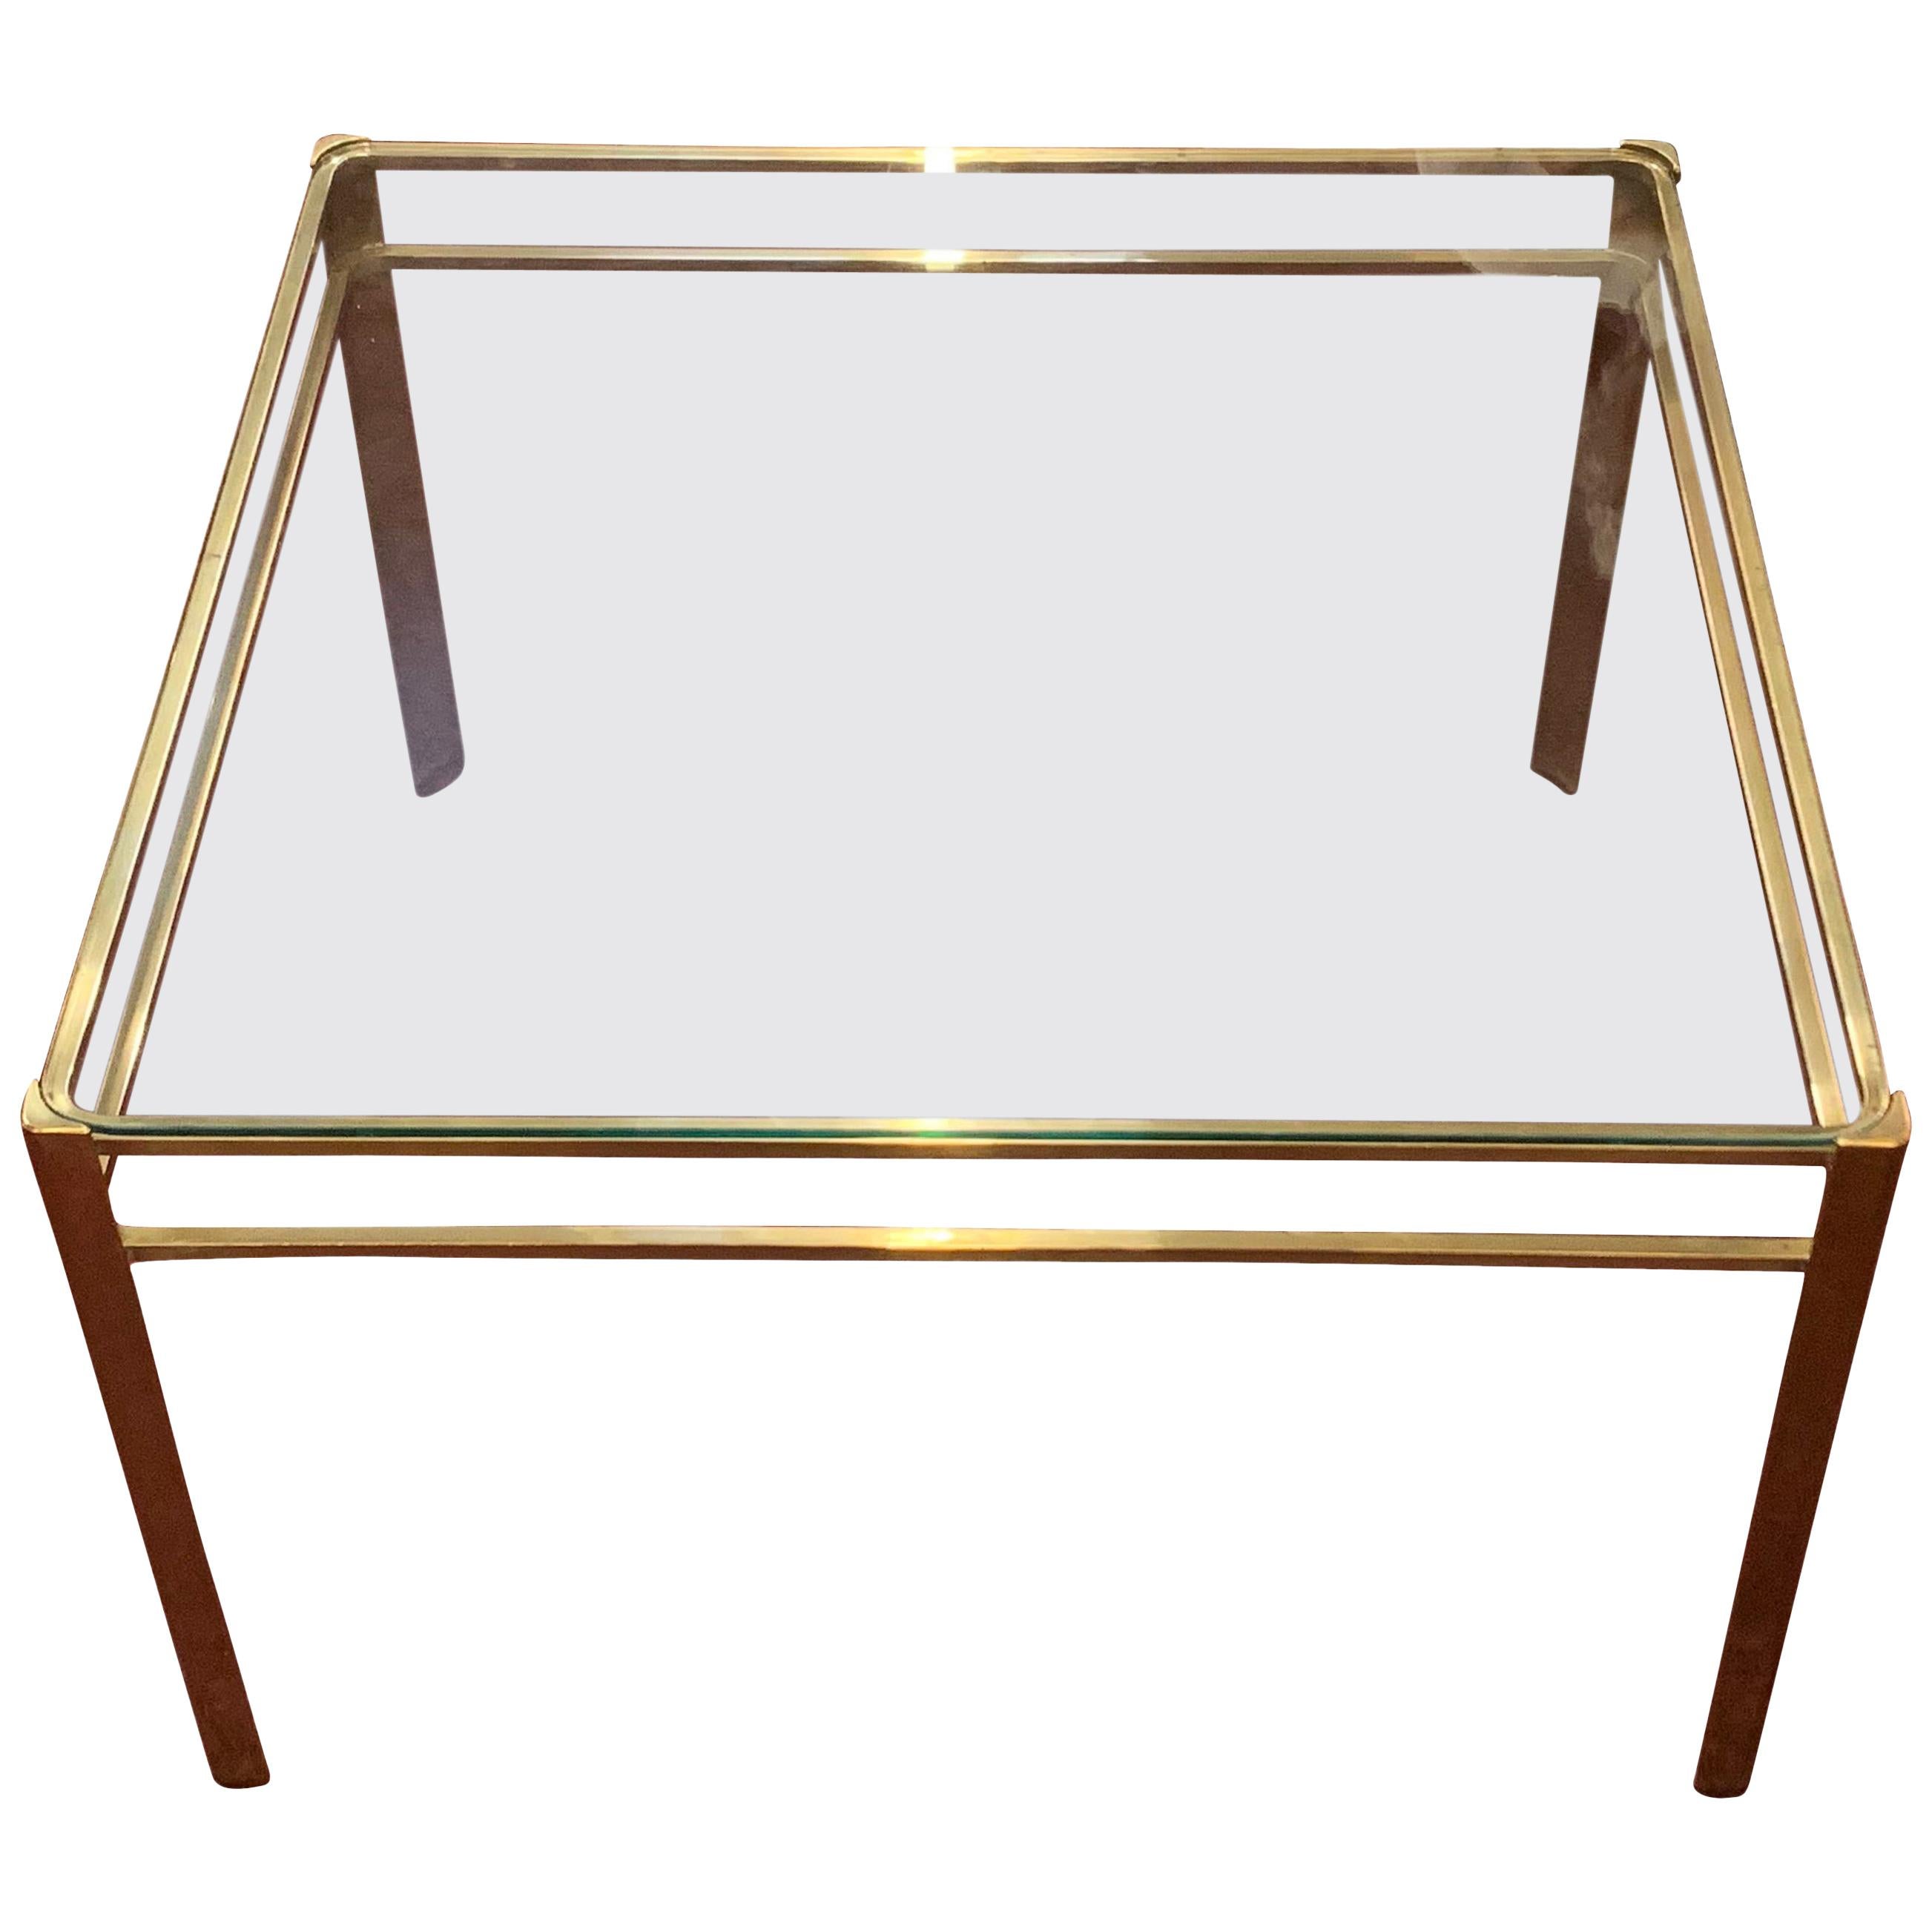 Jacques Quinet Brass and Glass Square Coffee Table, France, 1940s